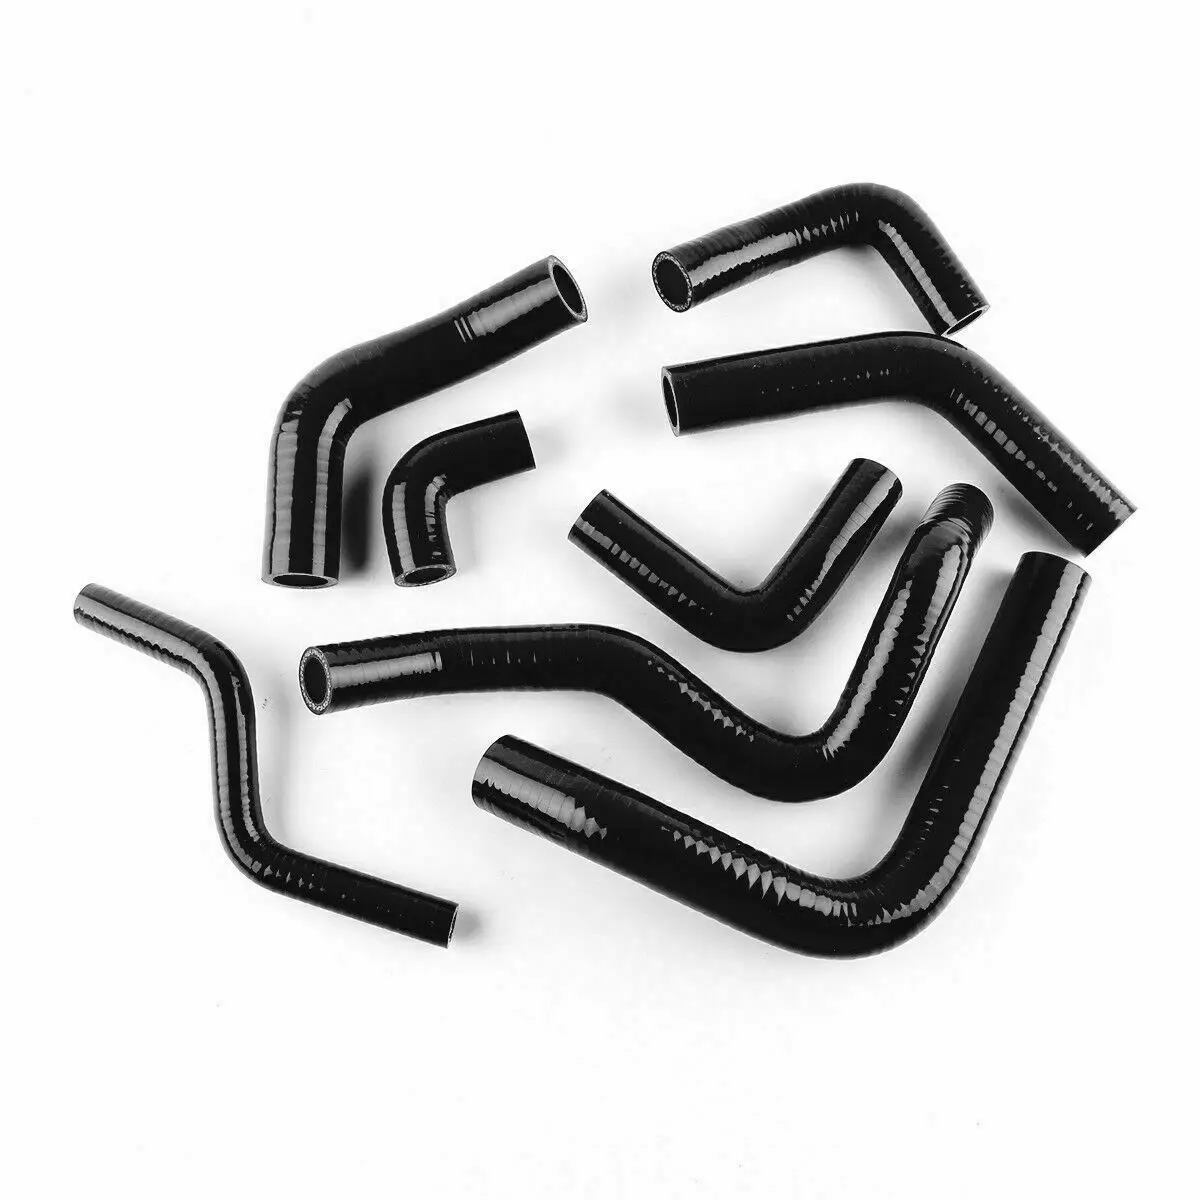 

8PCS Silicone Radiator Coolant Hose For 2002 2003 2004 Ducati 998 998S Replacement Parts Kit Pipe Upper and Lower